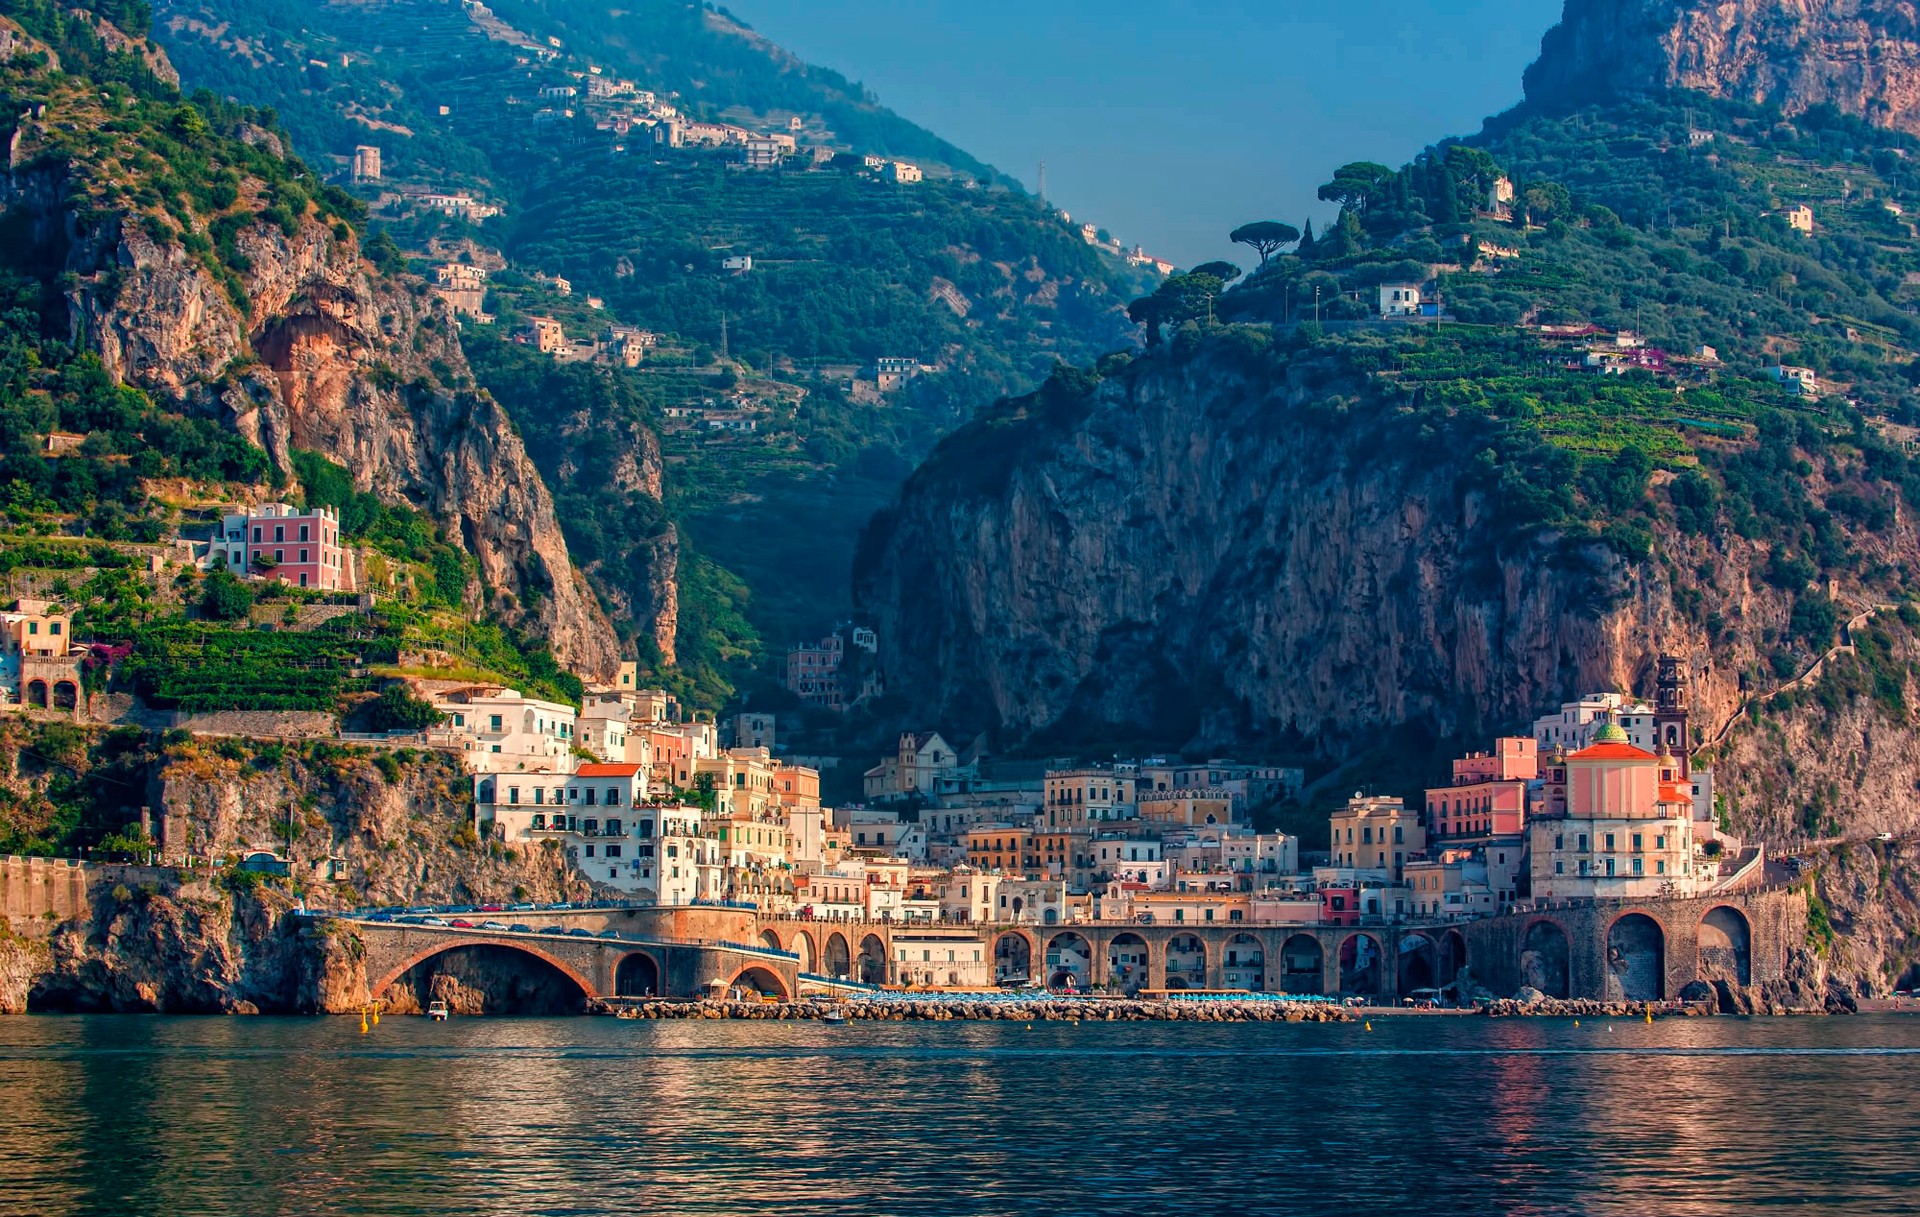 General 1920x1217 Italy Amalfi town landscape mountains water